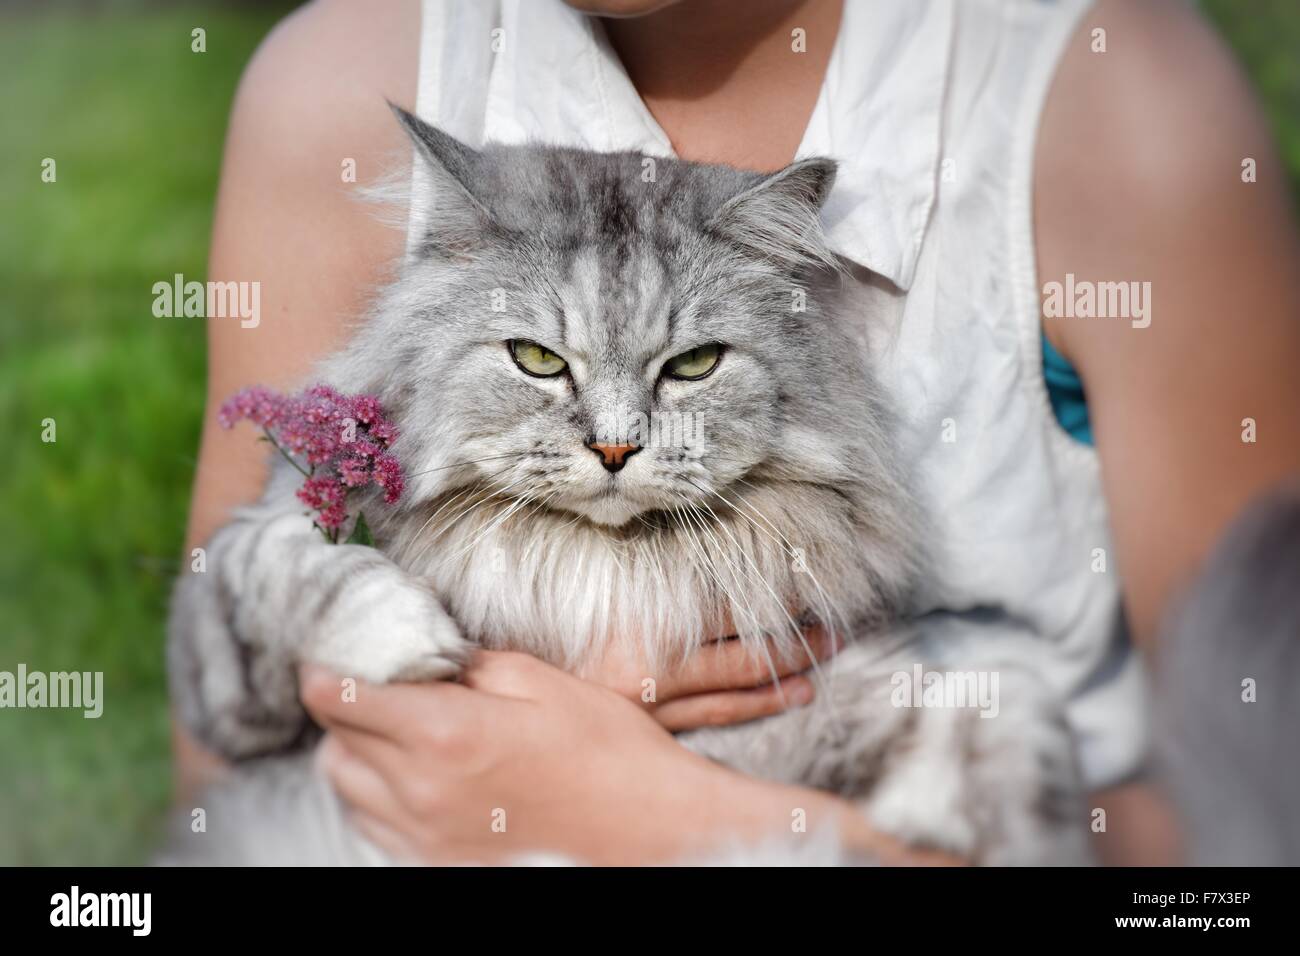 Teenage Girl sitting with a cat on her lap Stock Photo